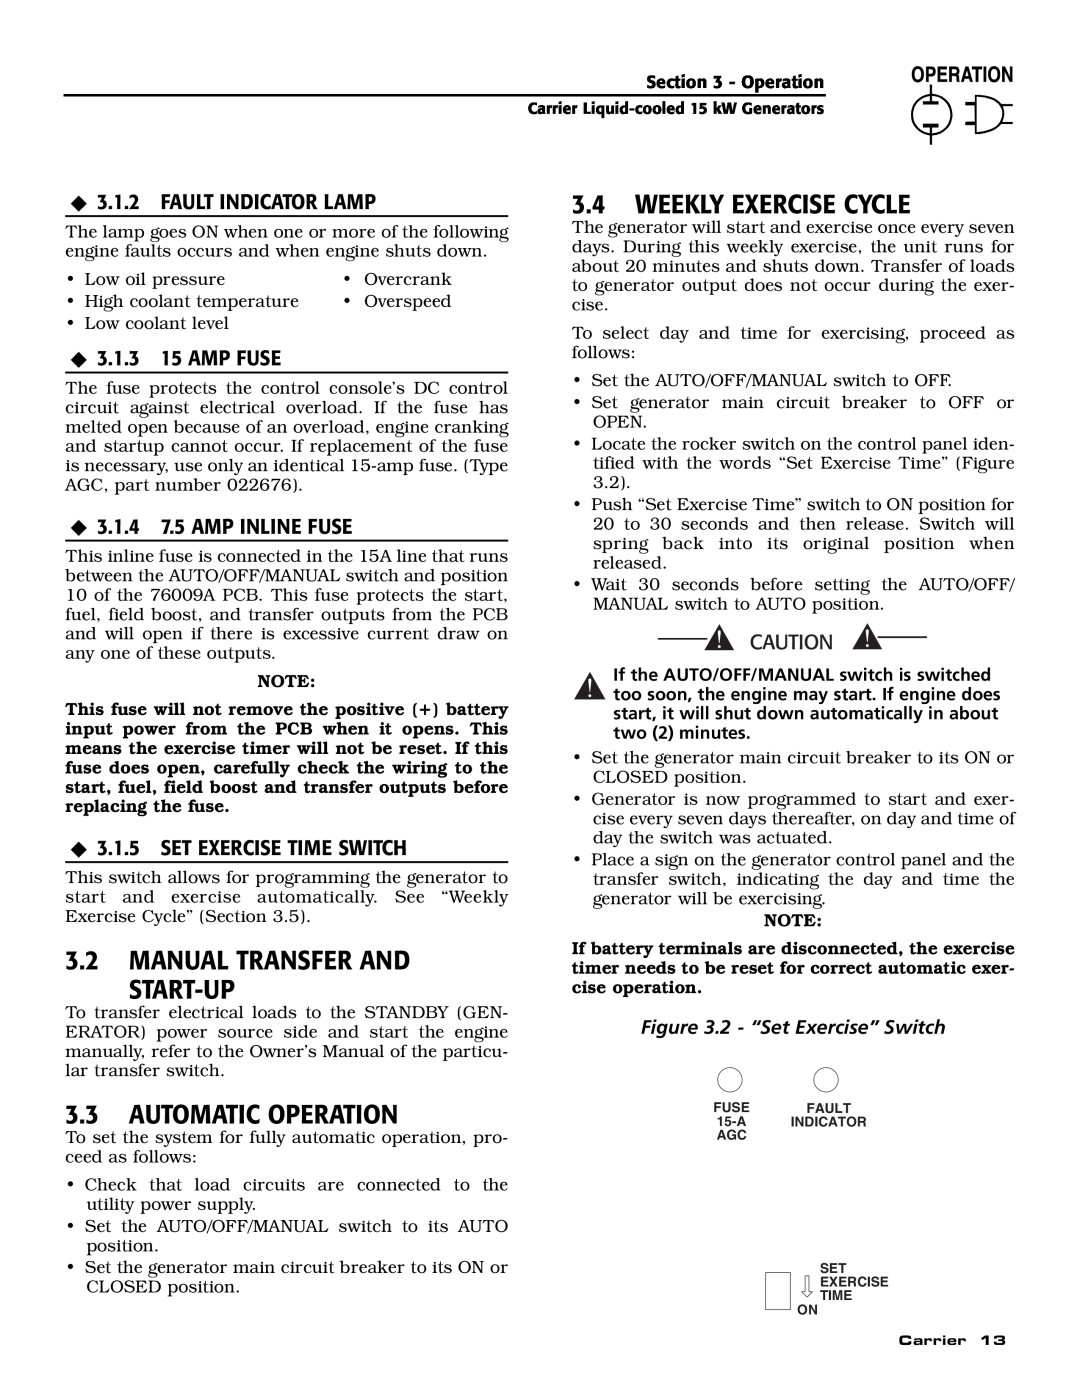 Generac ASPAS1CCL015 Manual Transfer And Start-Up, Automatic Operation, Weekly Exercise Cycle, ‹ 3.1.3 15 AMP FUSE 